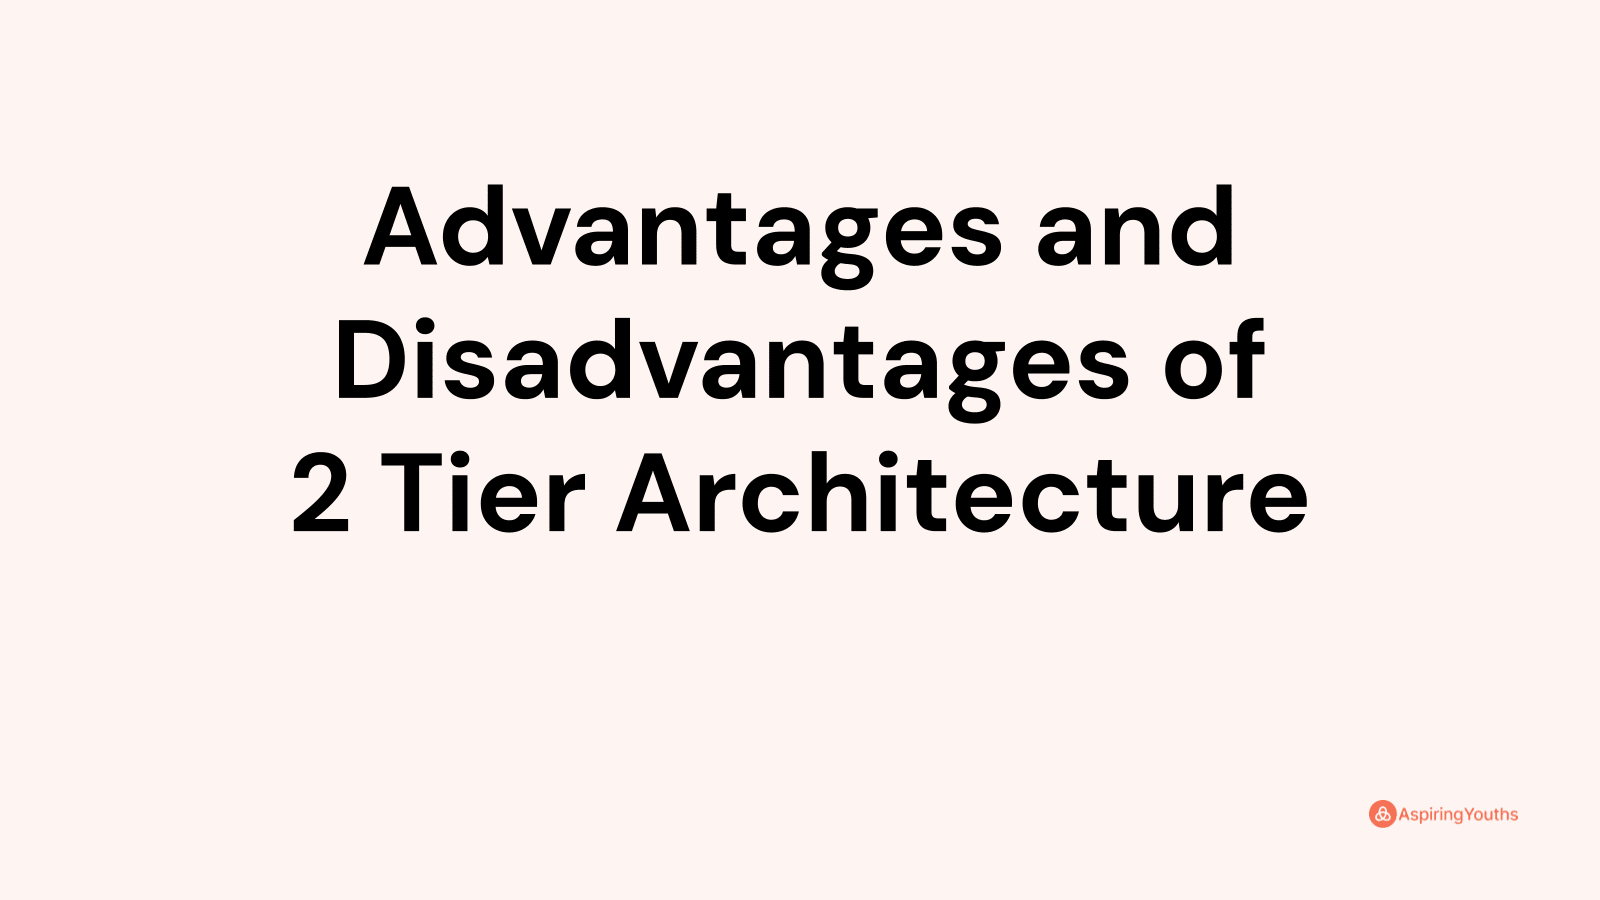 Advantages and disadvantages of 2 Tier Architecture